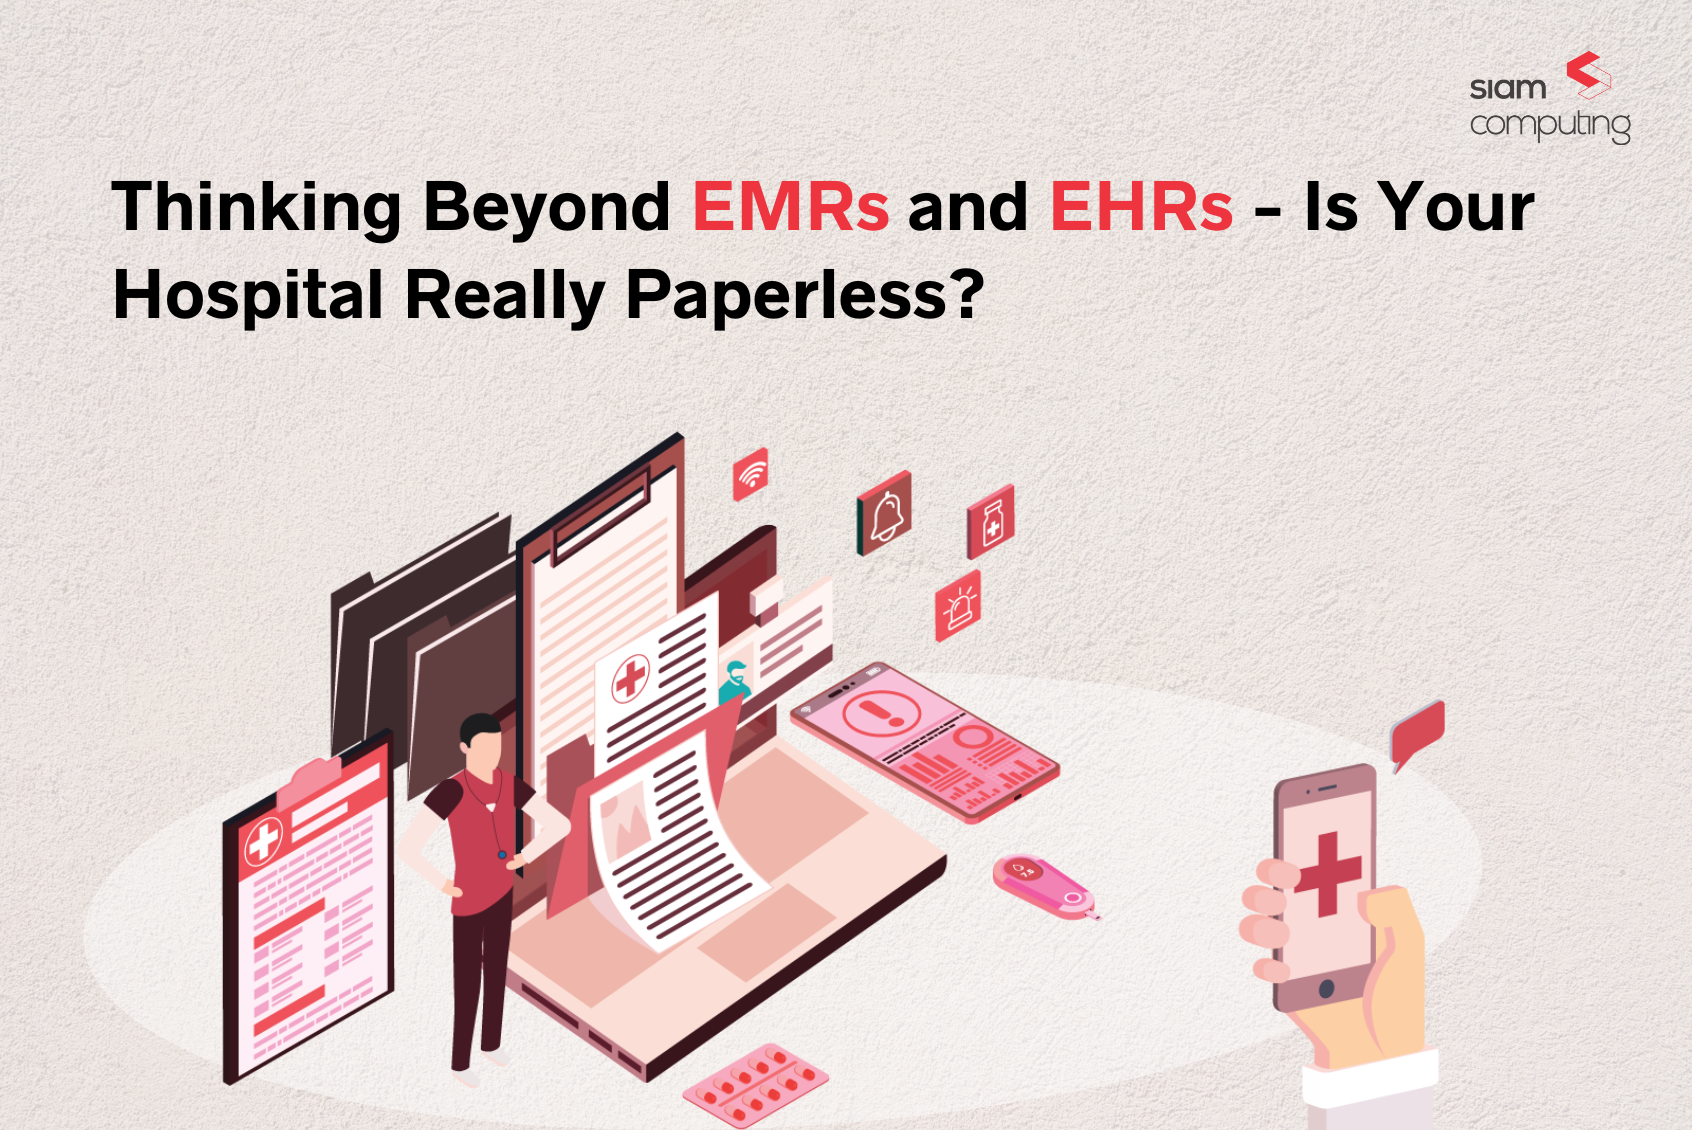 Thinking-Beyond-EMRs-and-EHRs-Is-Your-Hospital-Really-Paperless